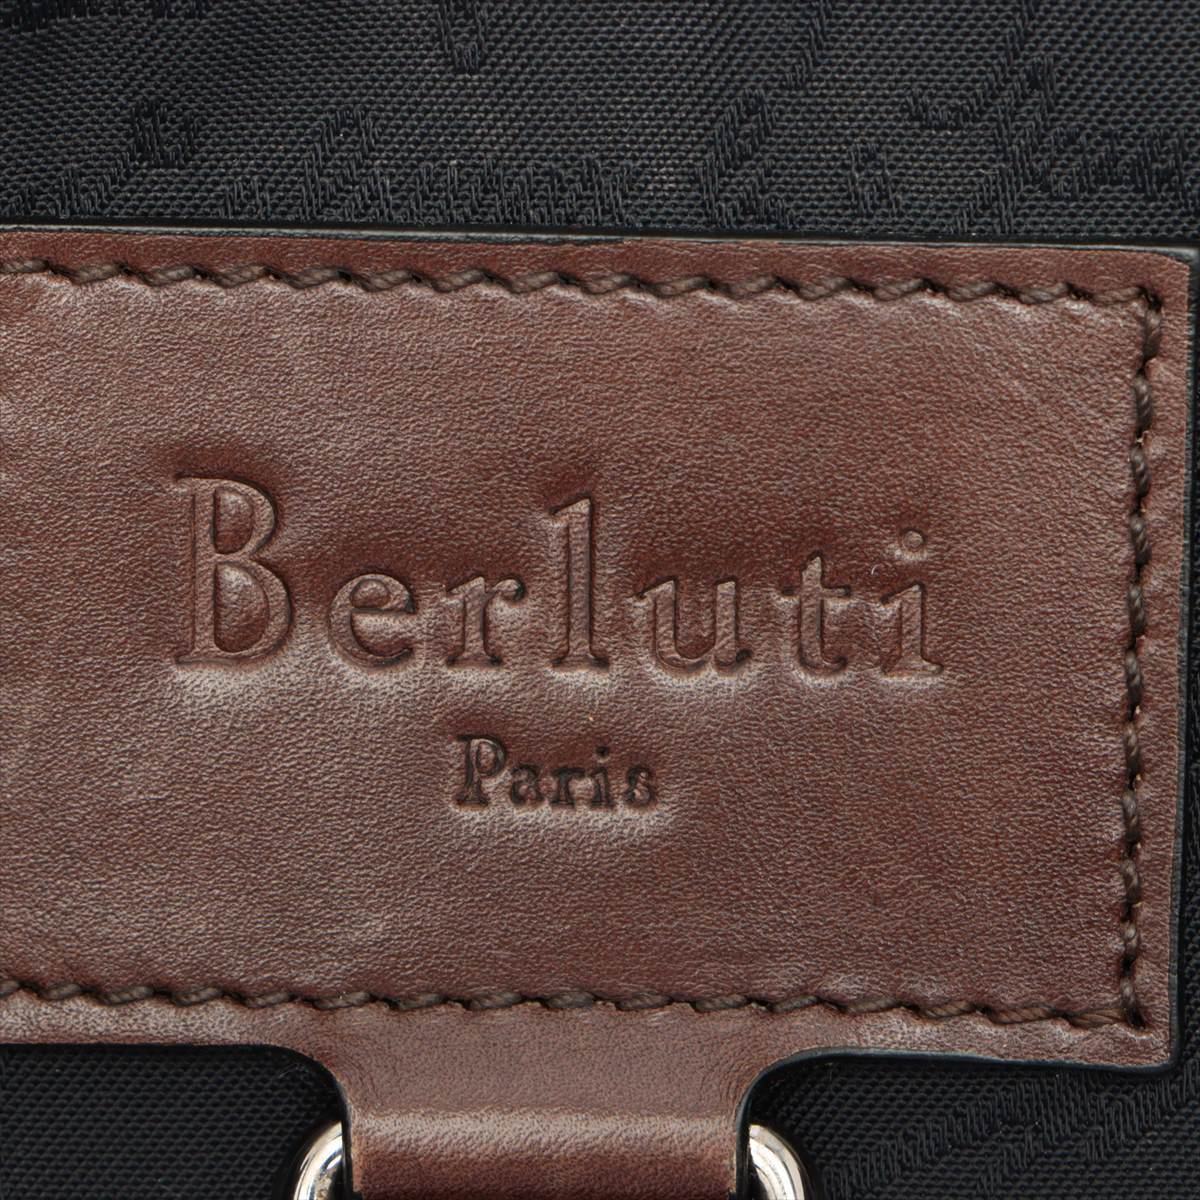 Belotti Caligraphy Leather Tote Bag Brown